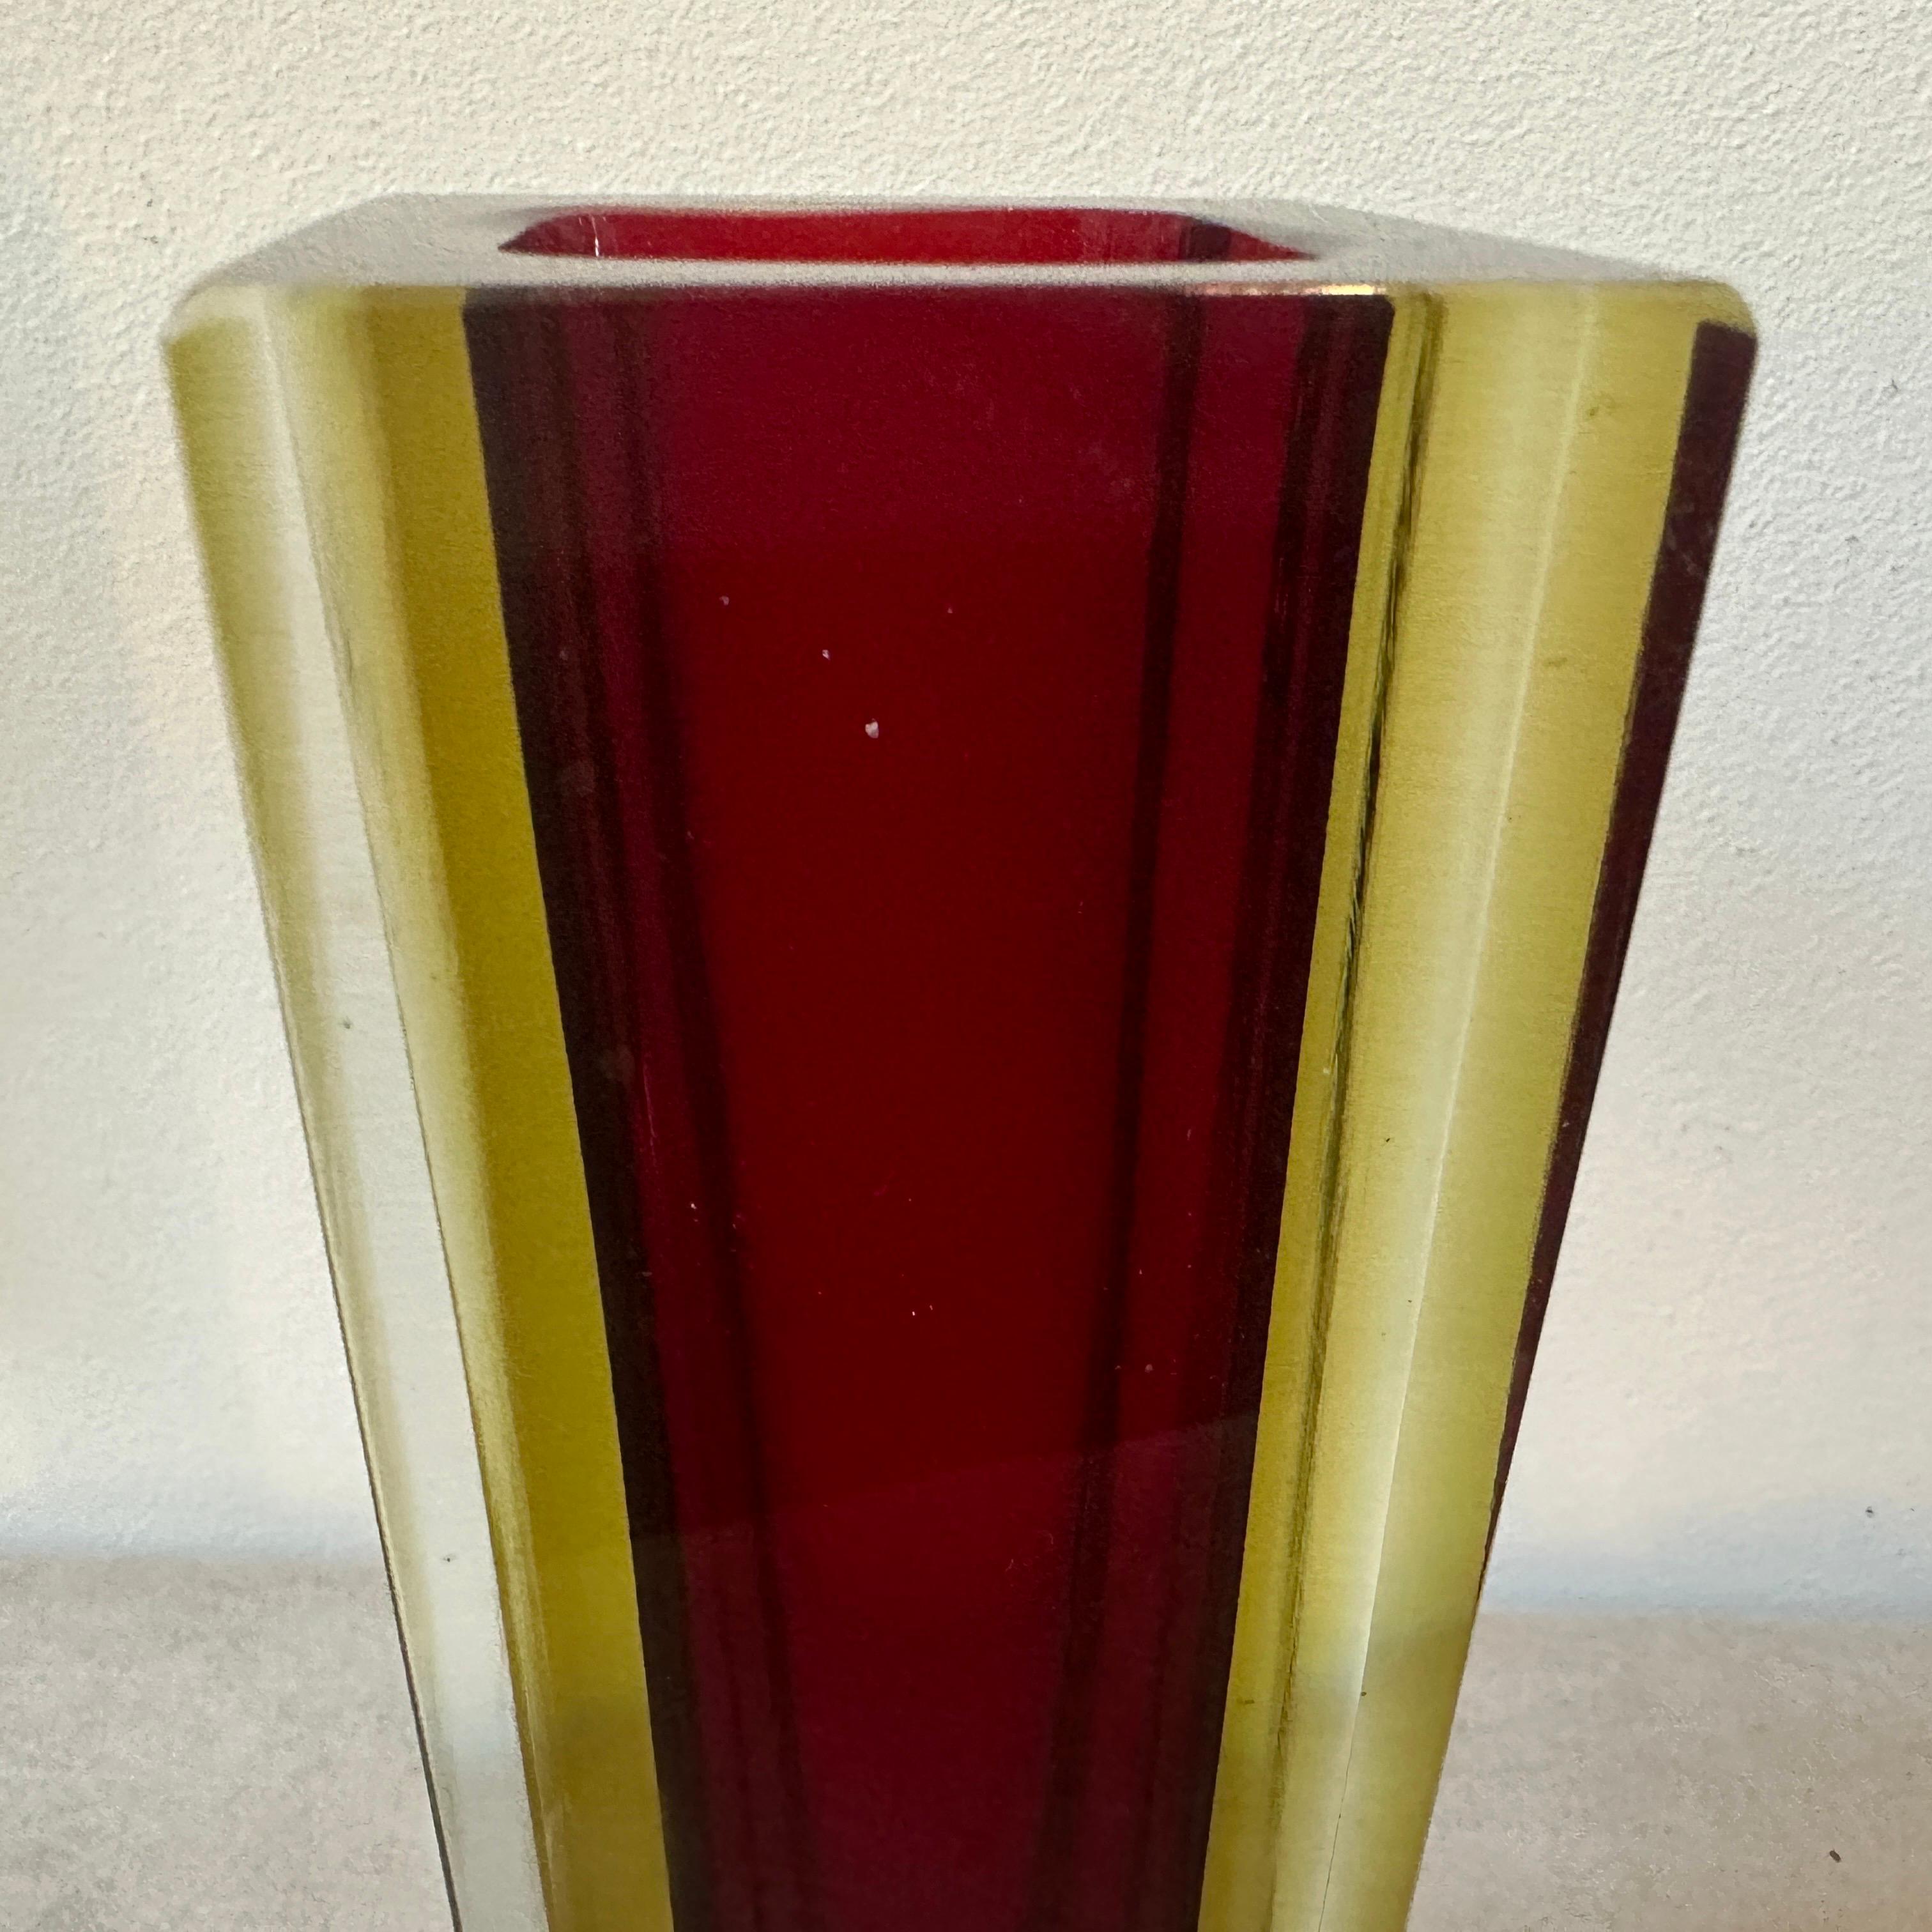 1960s, Modernist Red and Yellow Sommerso Murano Glass Square Vase by Seguso For Sale 3